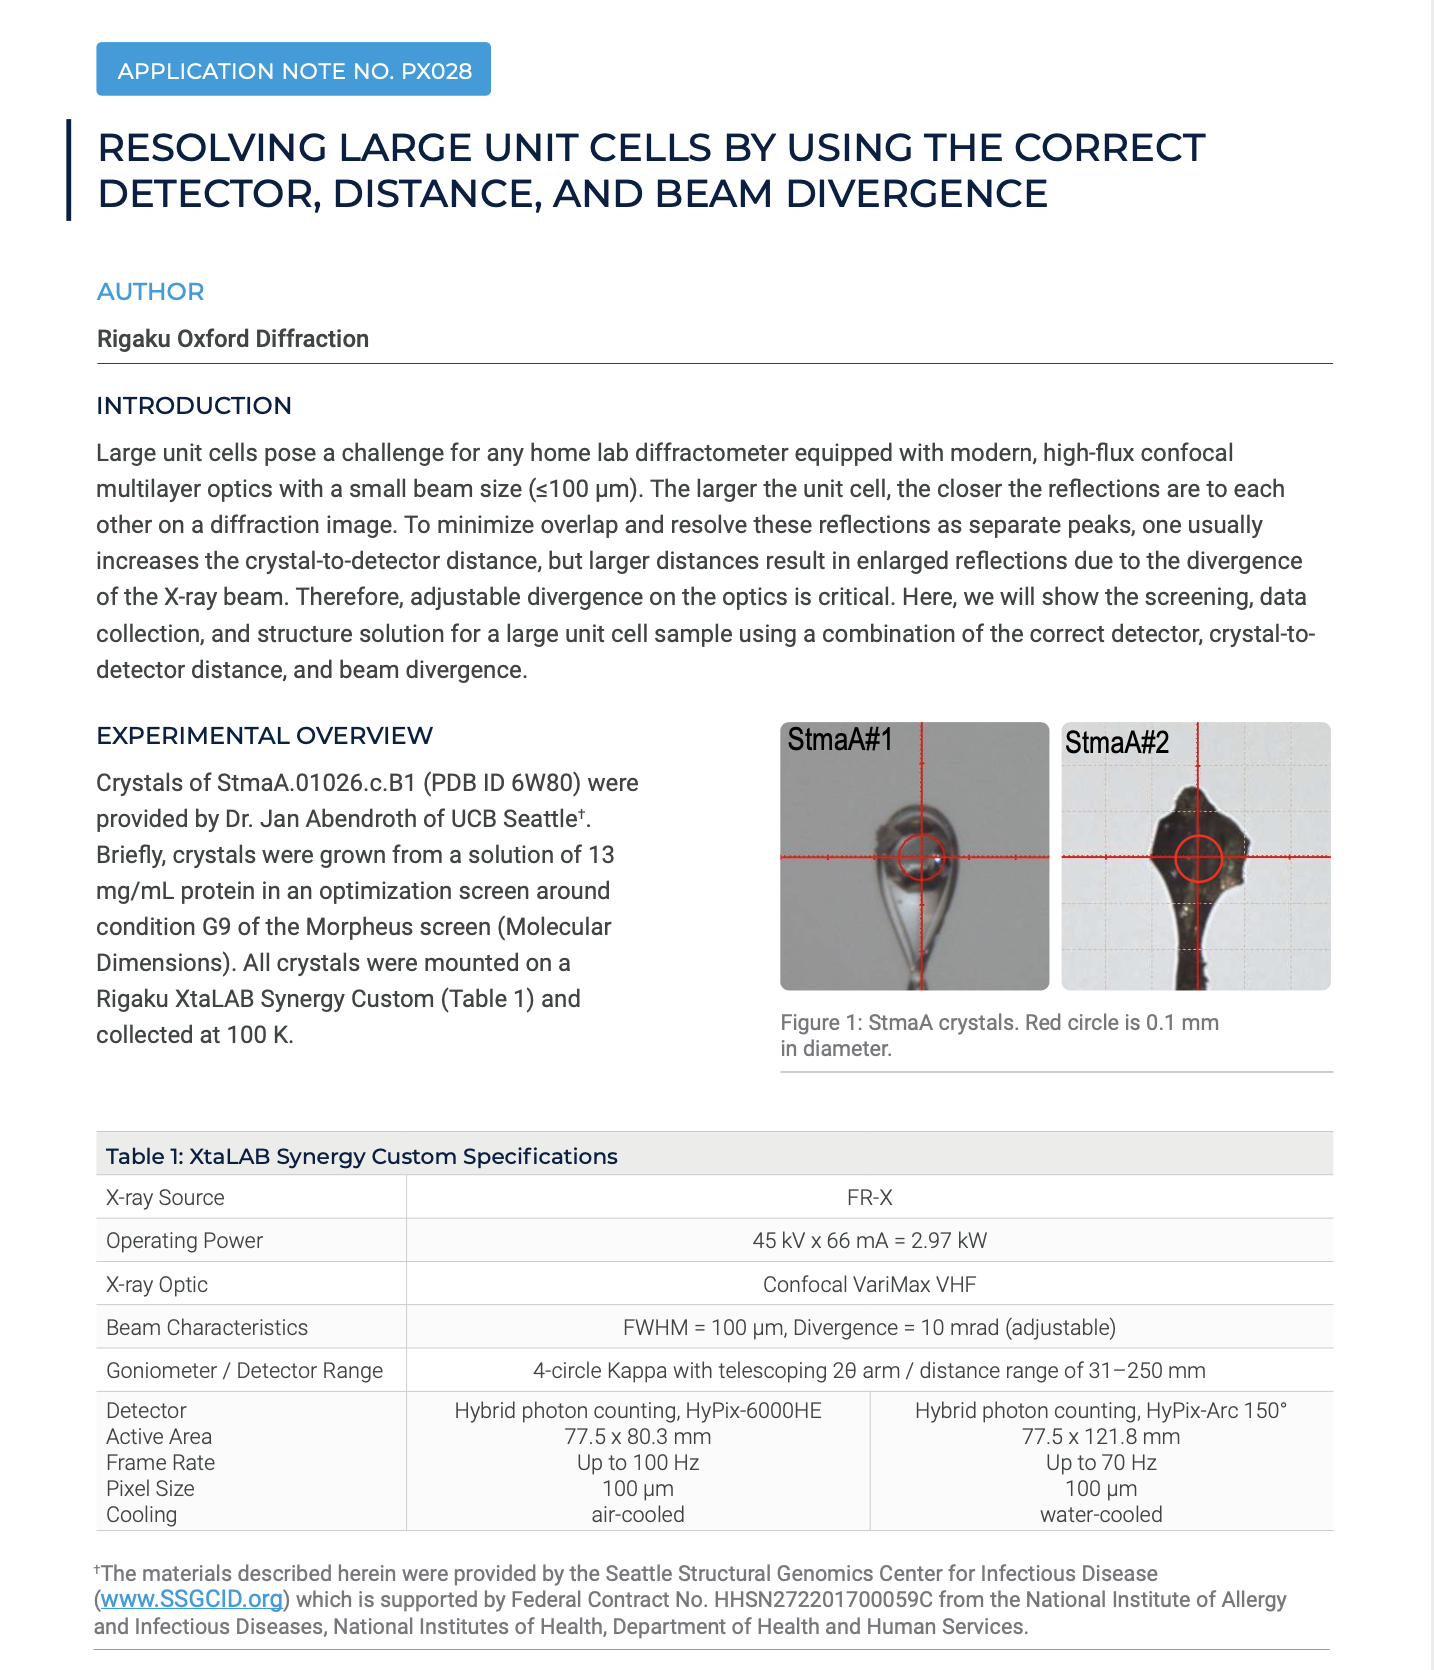 Resolving large unit cells by using the correct detector, distance, and beam divergence